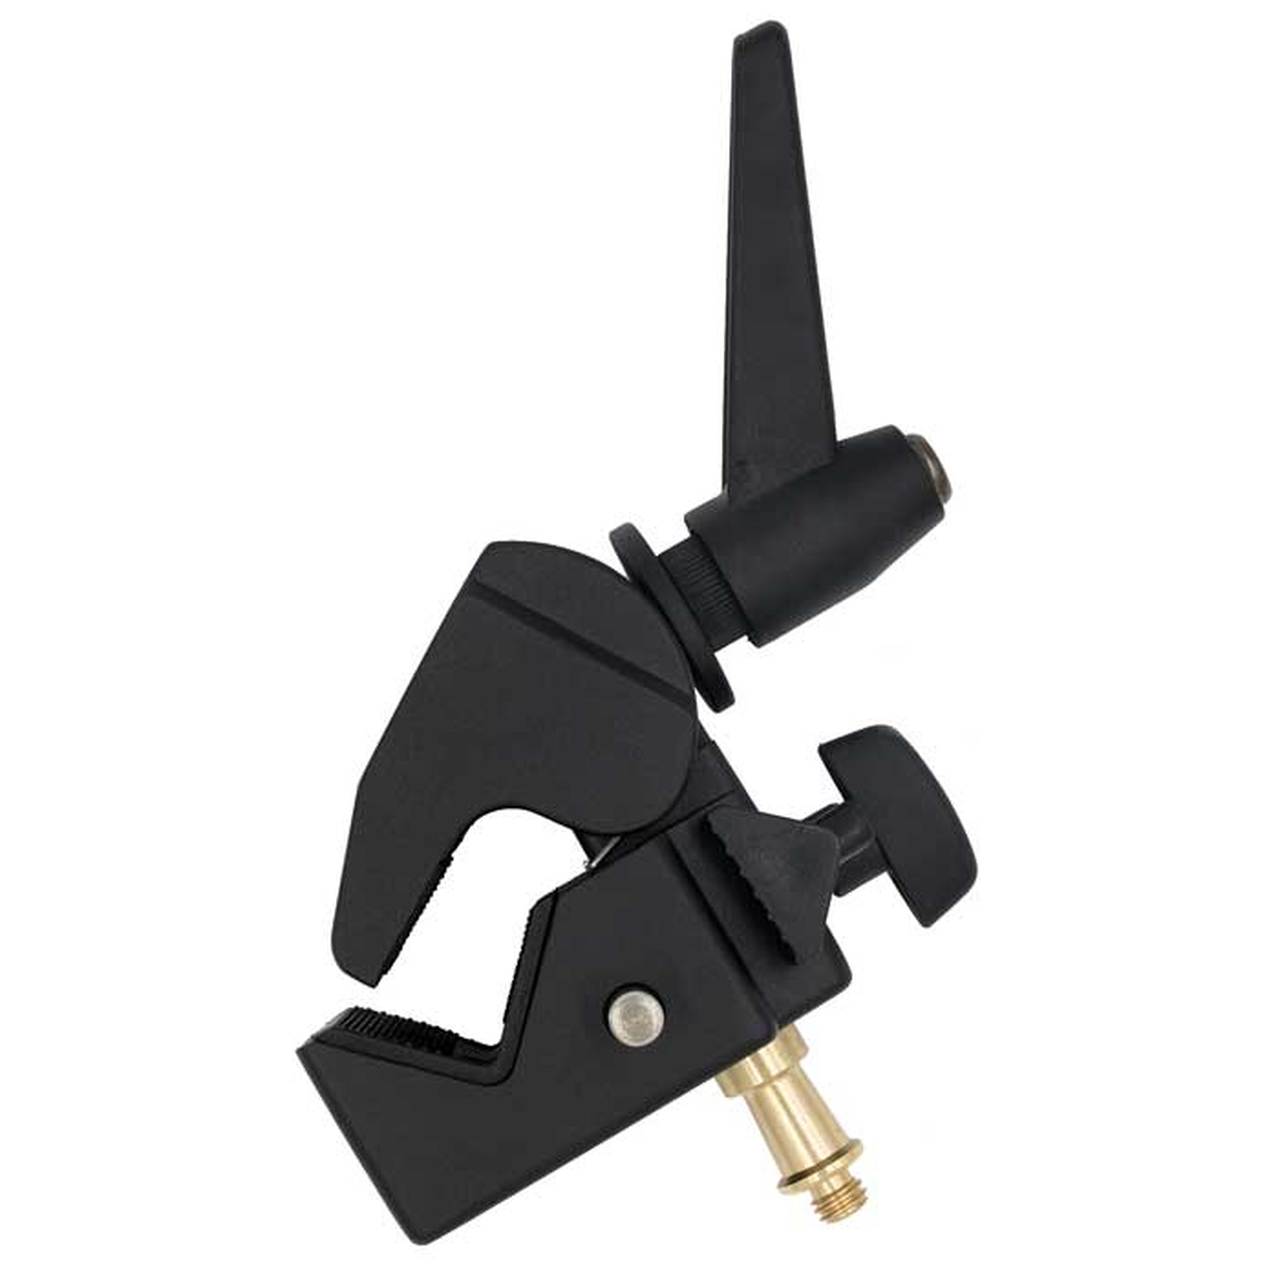 Promaster 5500 Studio Clamp with Brass  Stud and Double Spigot